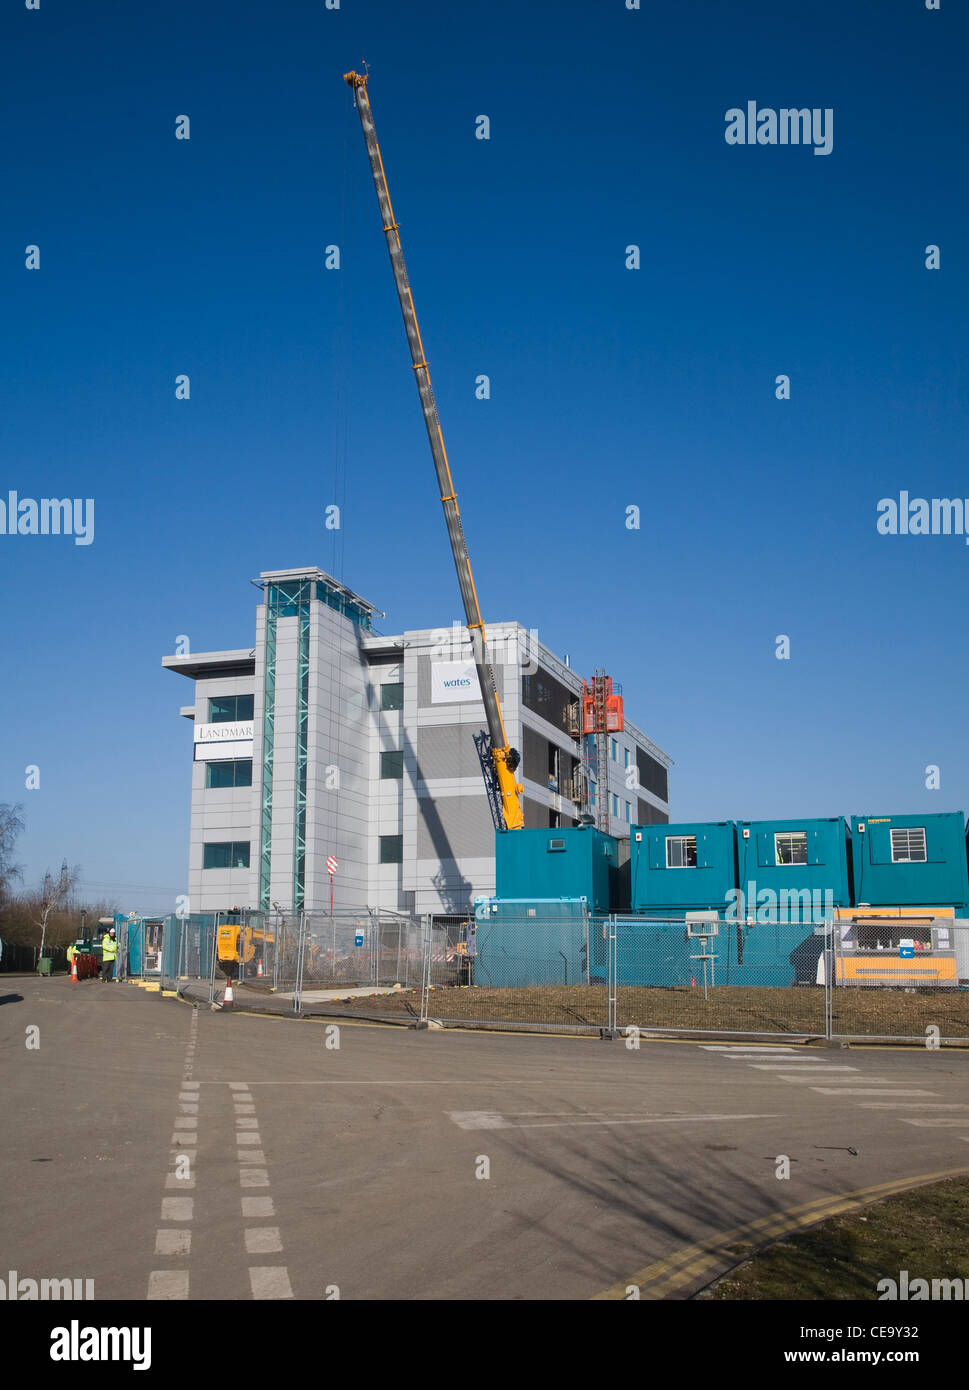 Large extensible crane construction site Whitehouse industrial estate, Ipswich, Suffolk, England Stock Photo